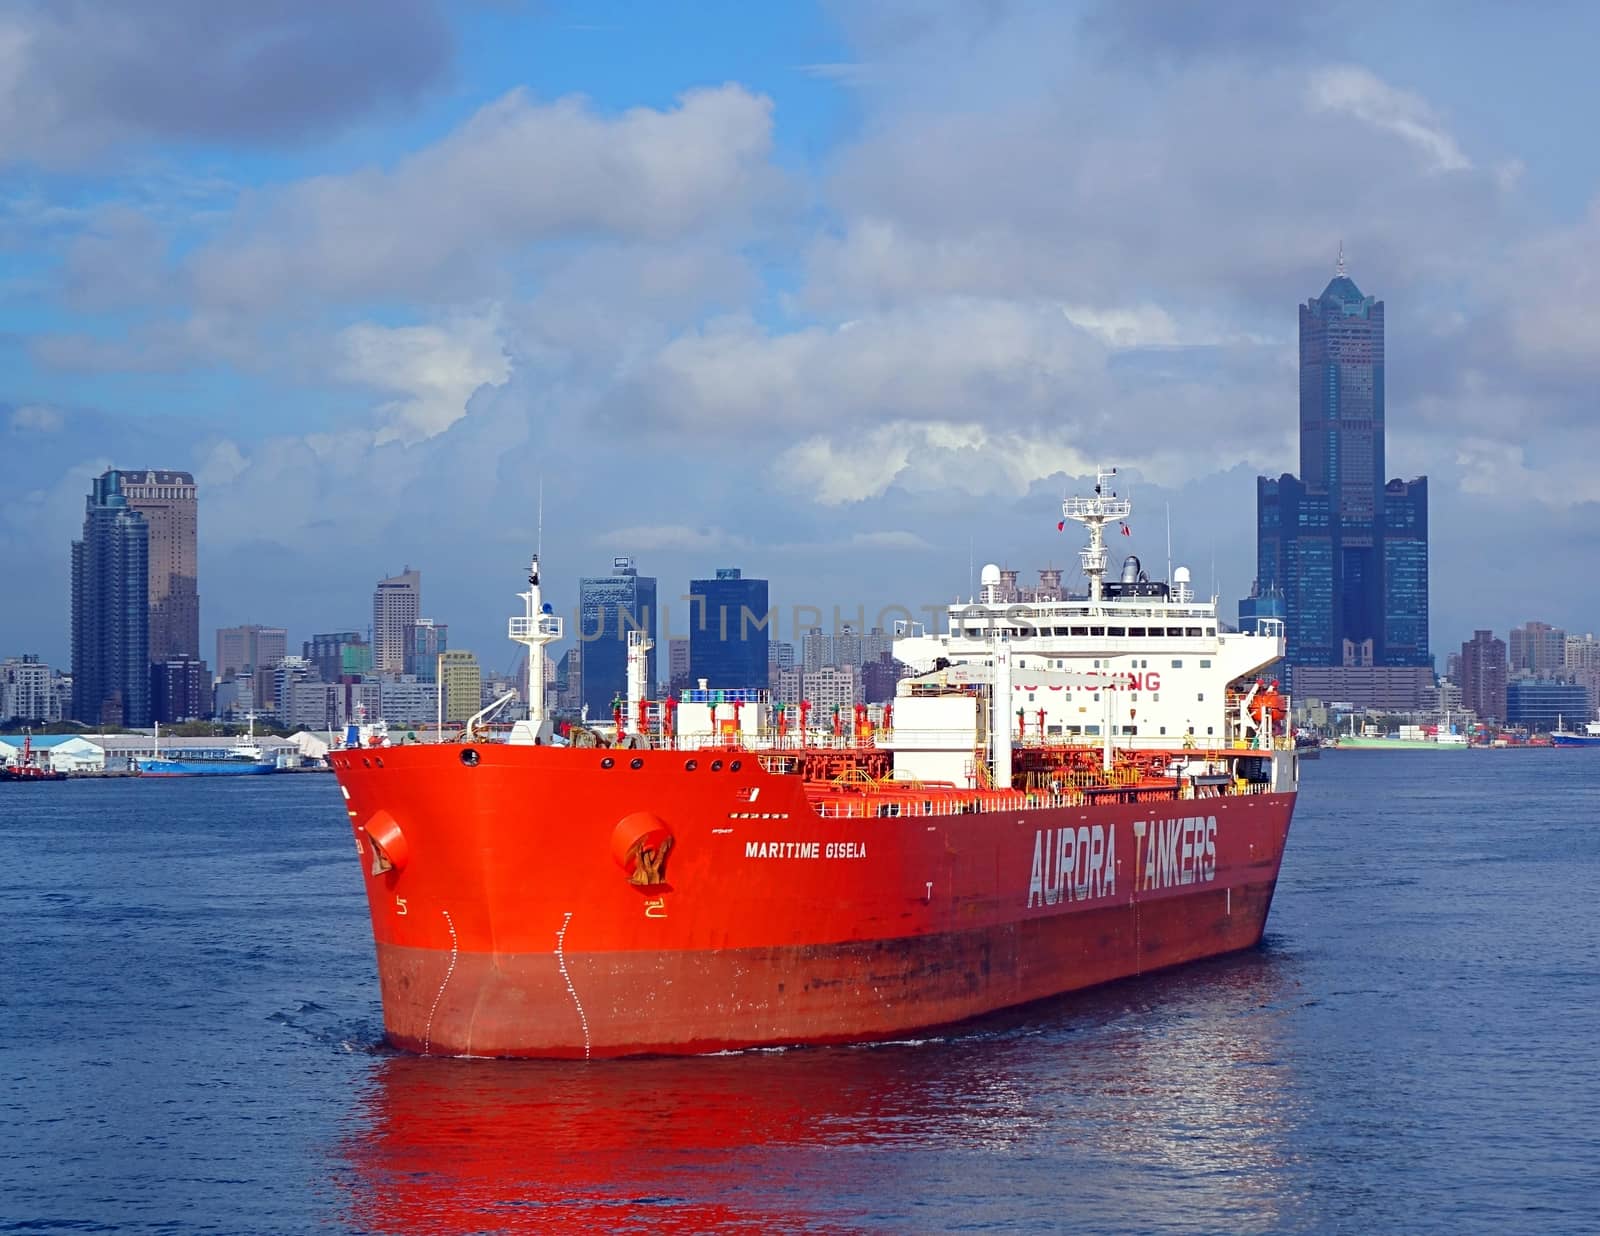 KAOHSIUNG, TAIWAN -- AUGUST 12, 2015: The Hong Kong registered oil tanker Maritime Gisela makes its way towards the Kaohsiung Port exit.

